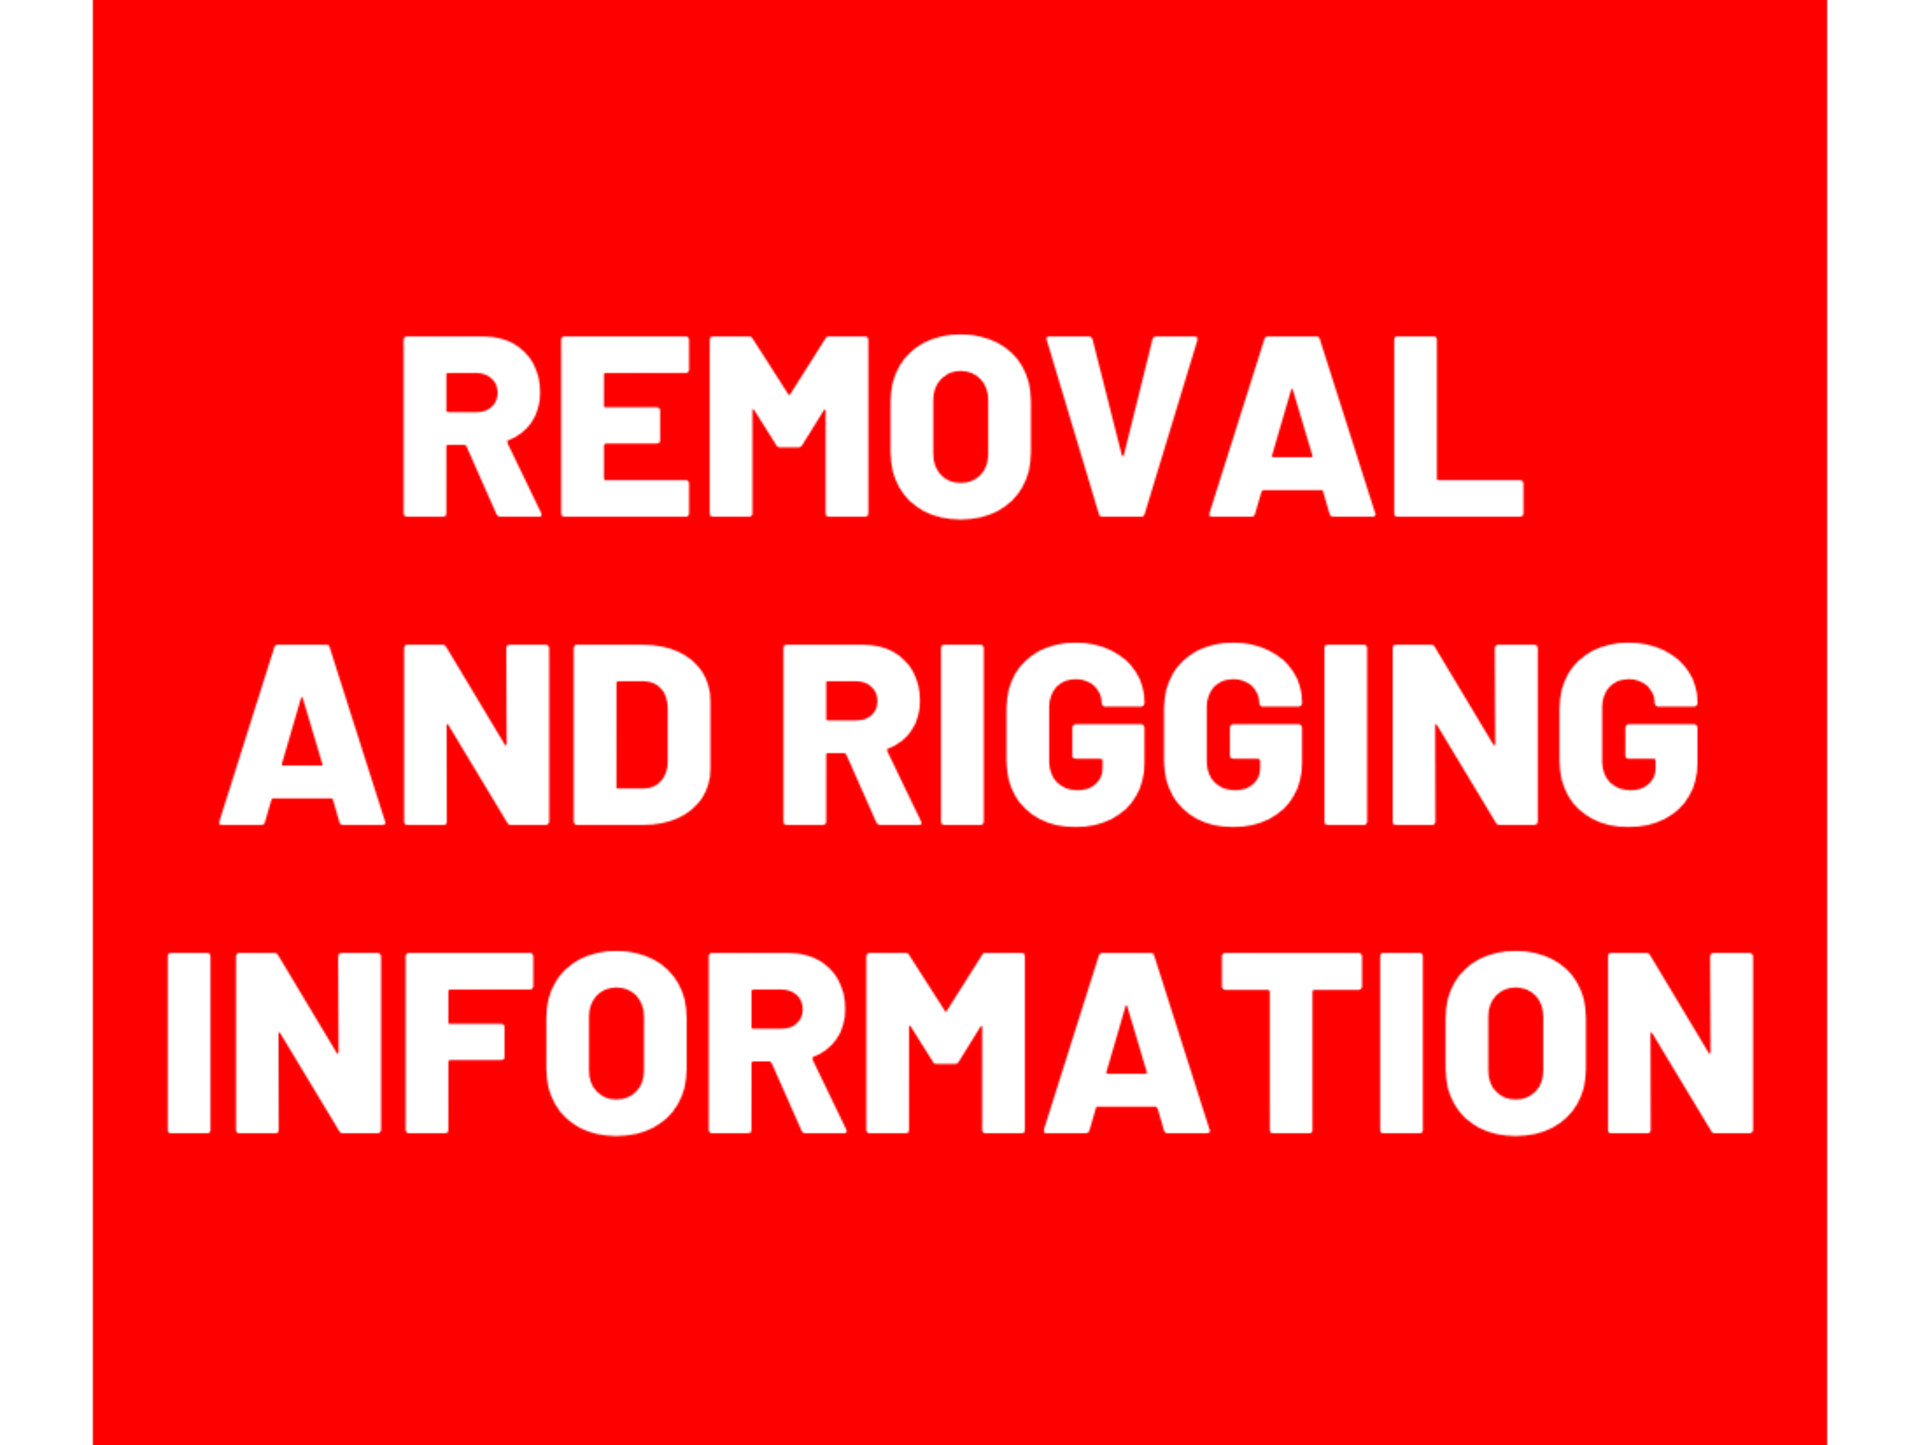 THE EXCLUSIVE RIGGER & REMOVAL AGENT, (“ERRA”) FOR THIS AUCTION IS:Star Rigging and Crane, LLC,